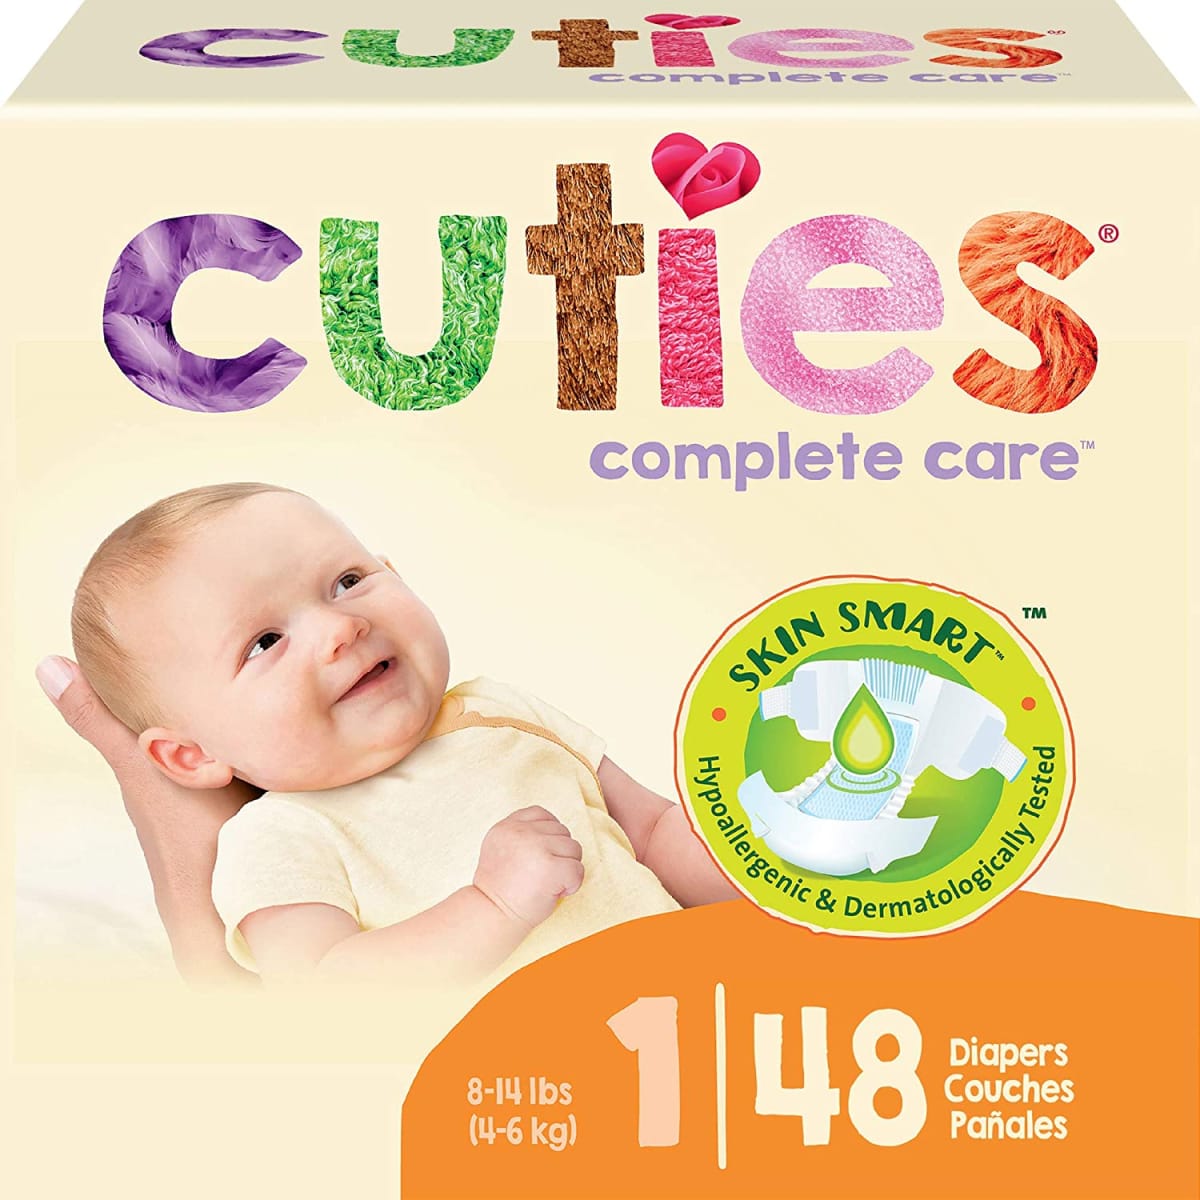 Complete Care Baby Diapers